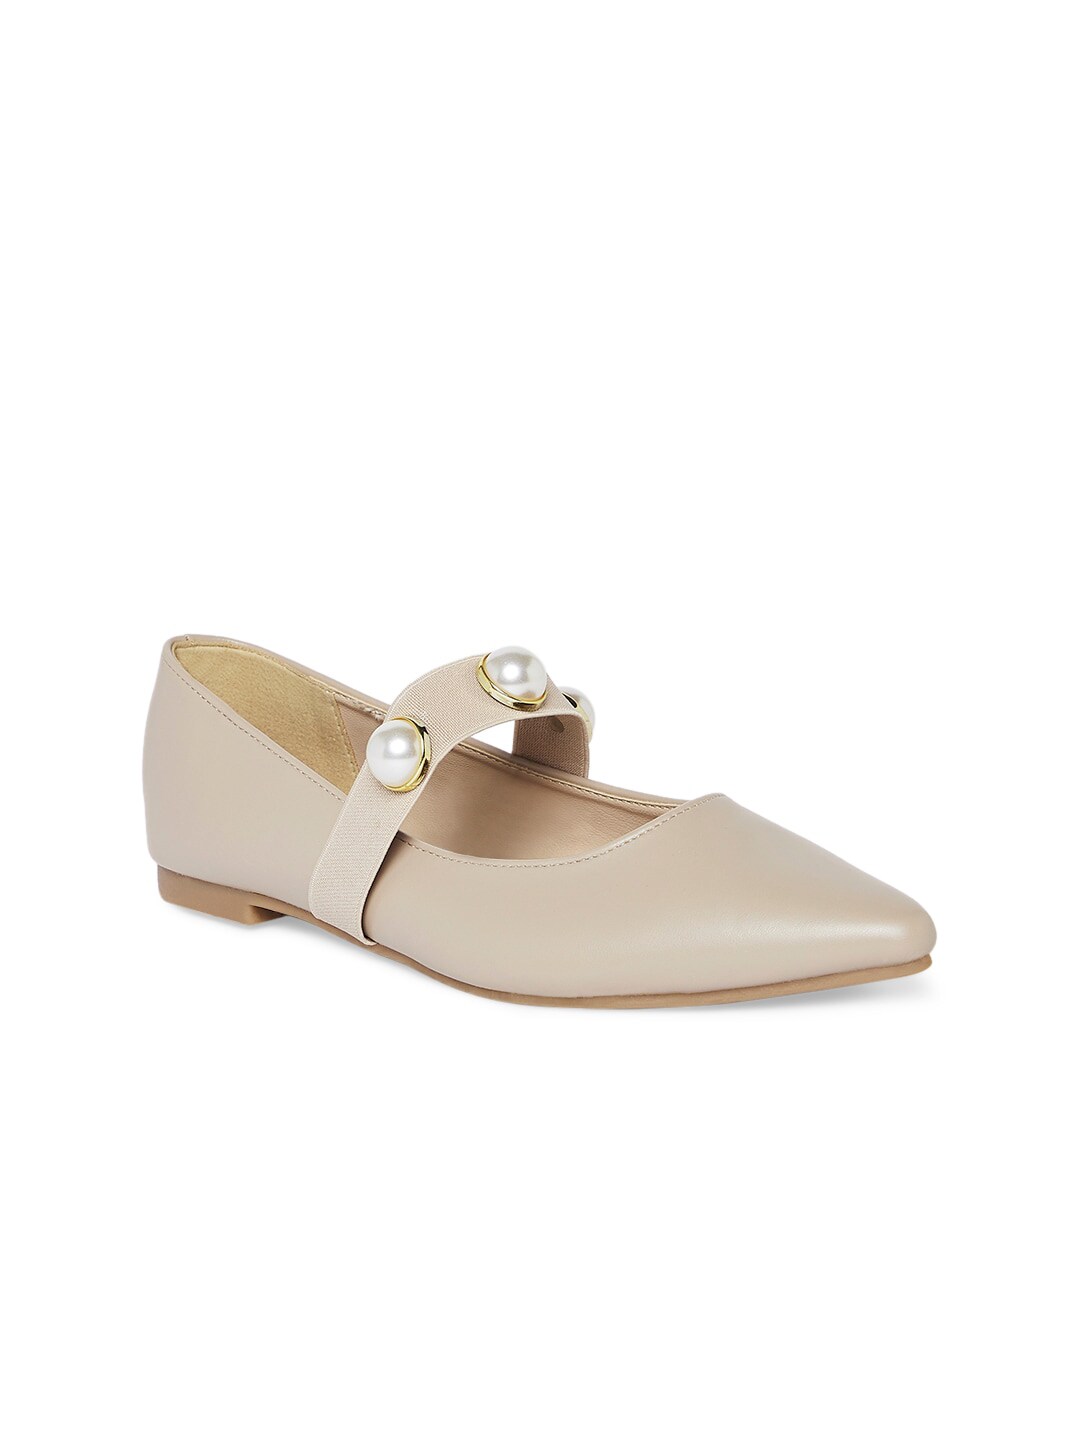 Forever Glam by Pantaloons Women Taupe PU Flatforms Price in India